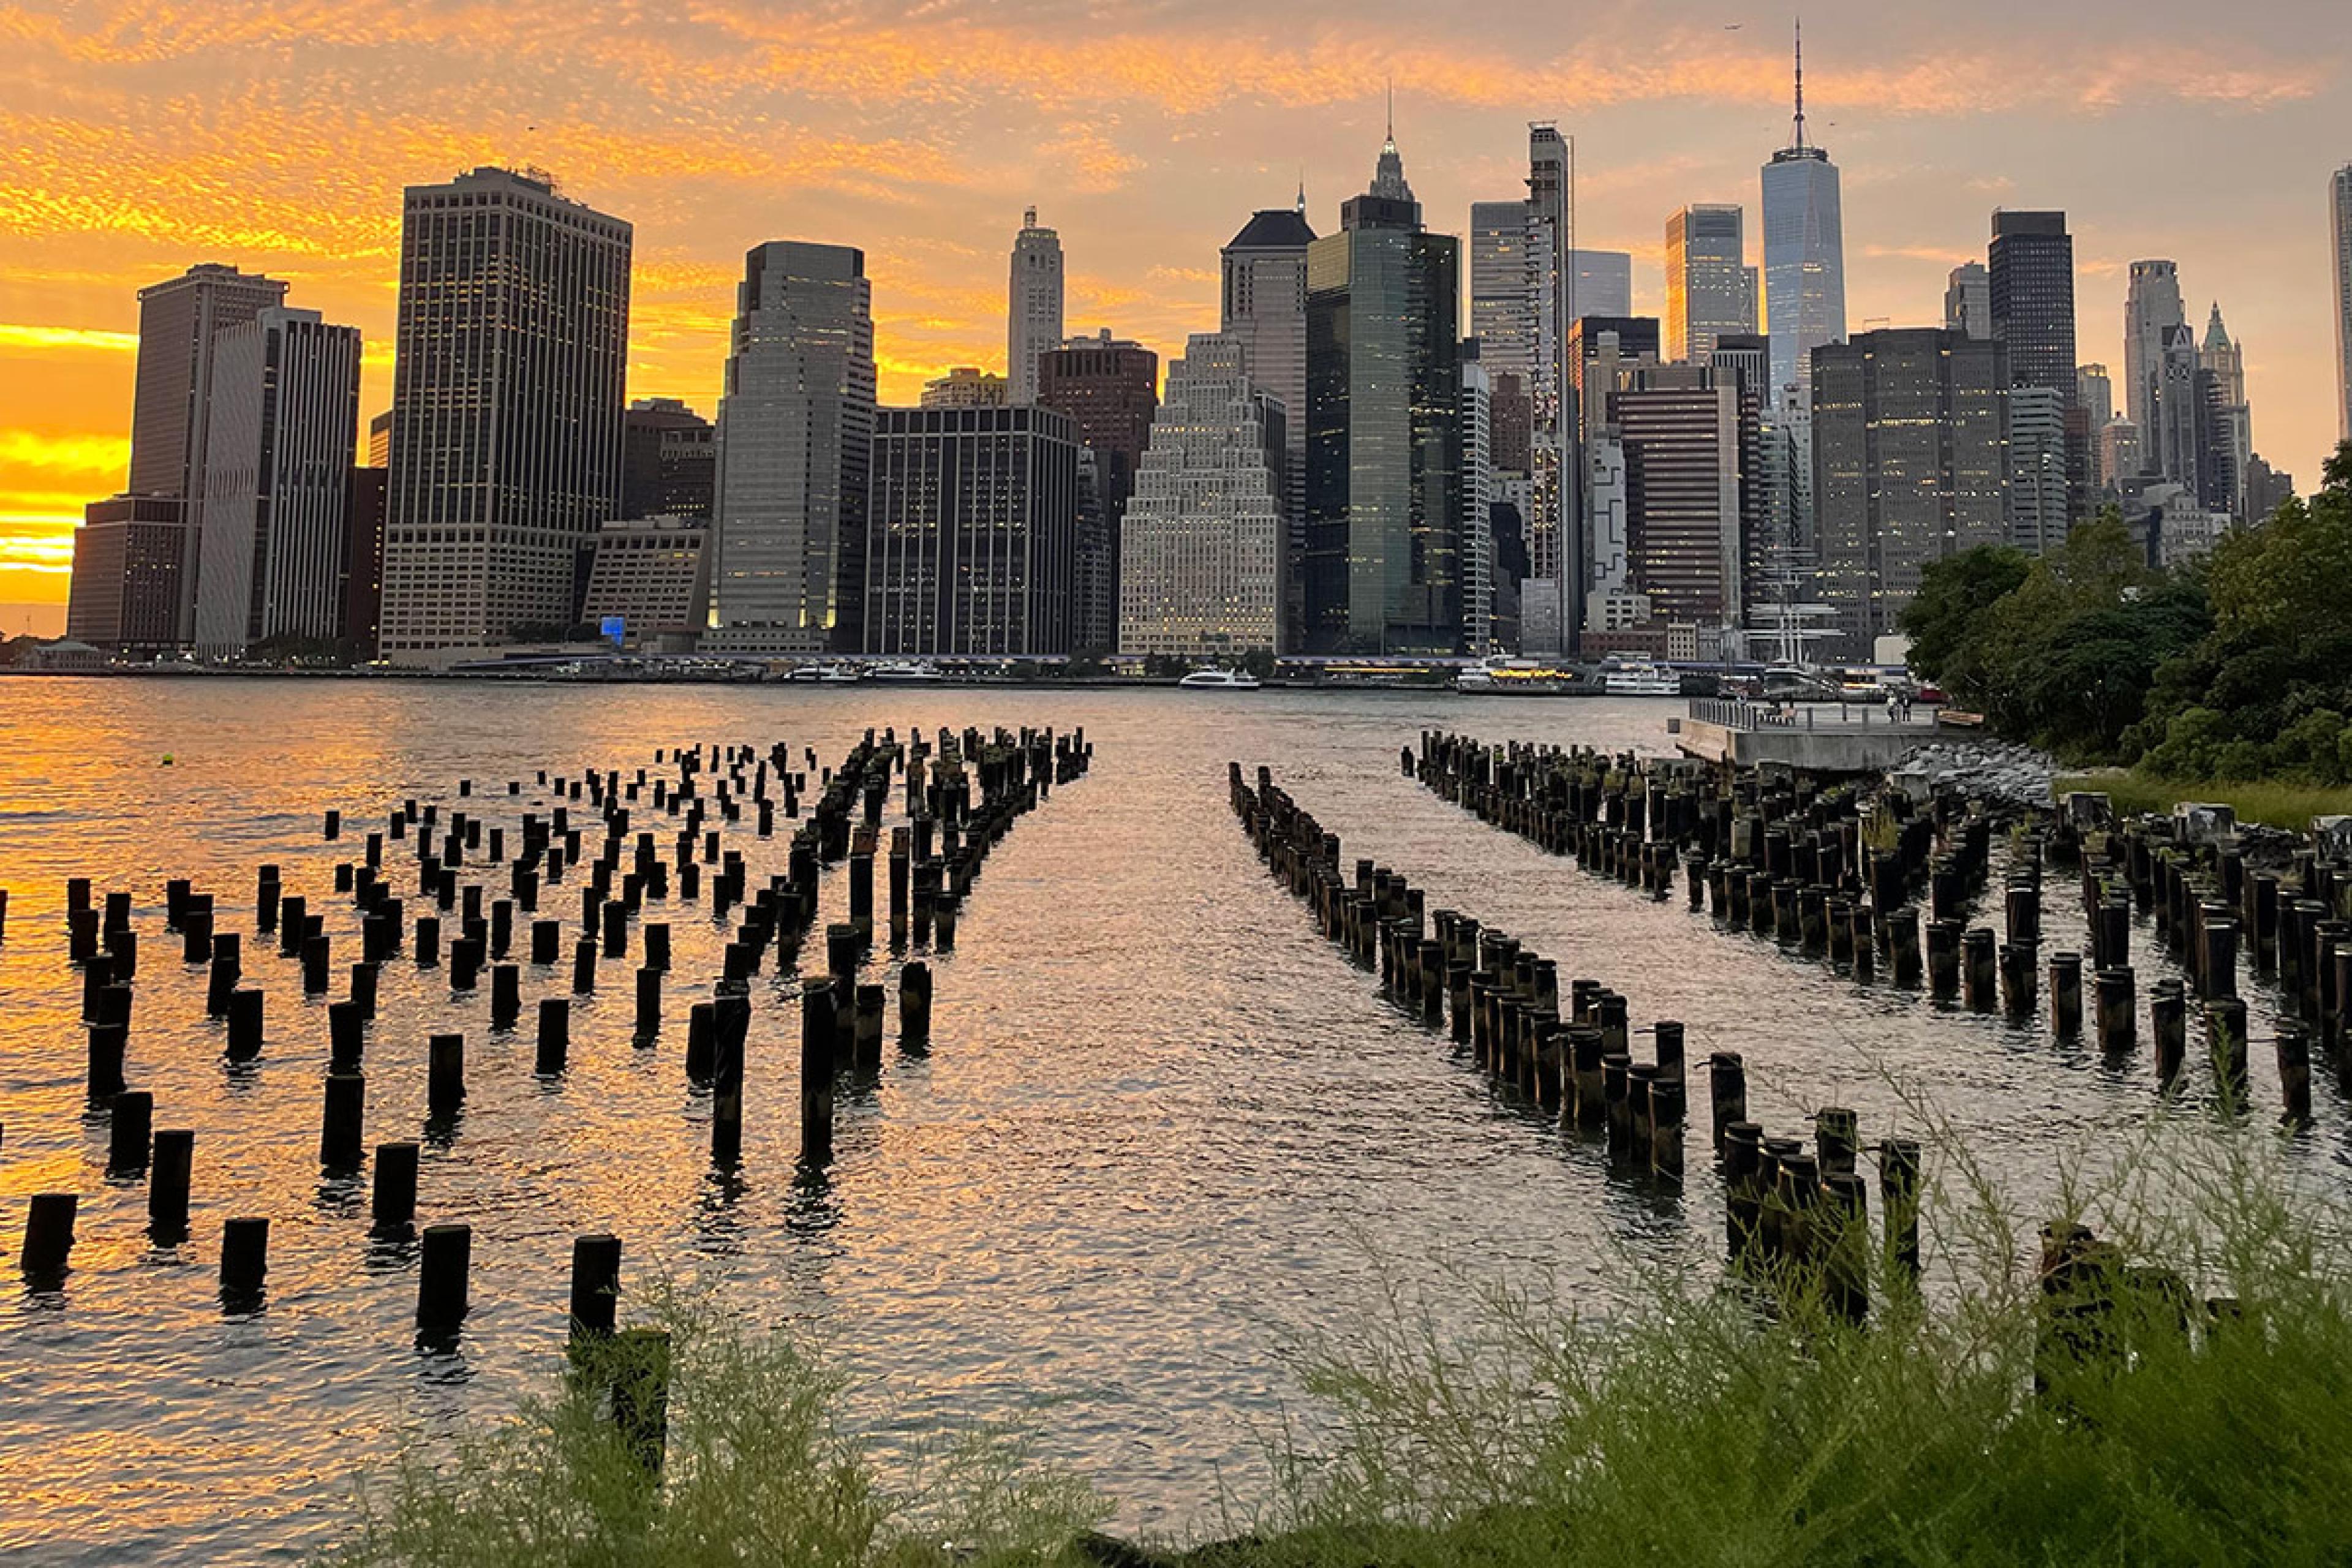 brooklyn bridge park views of lower manhattan over the water at sunset